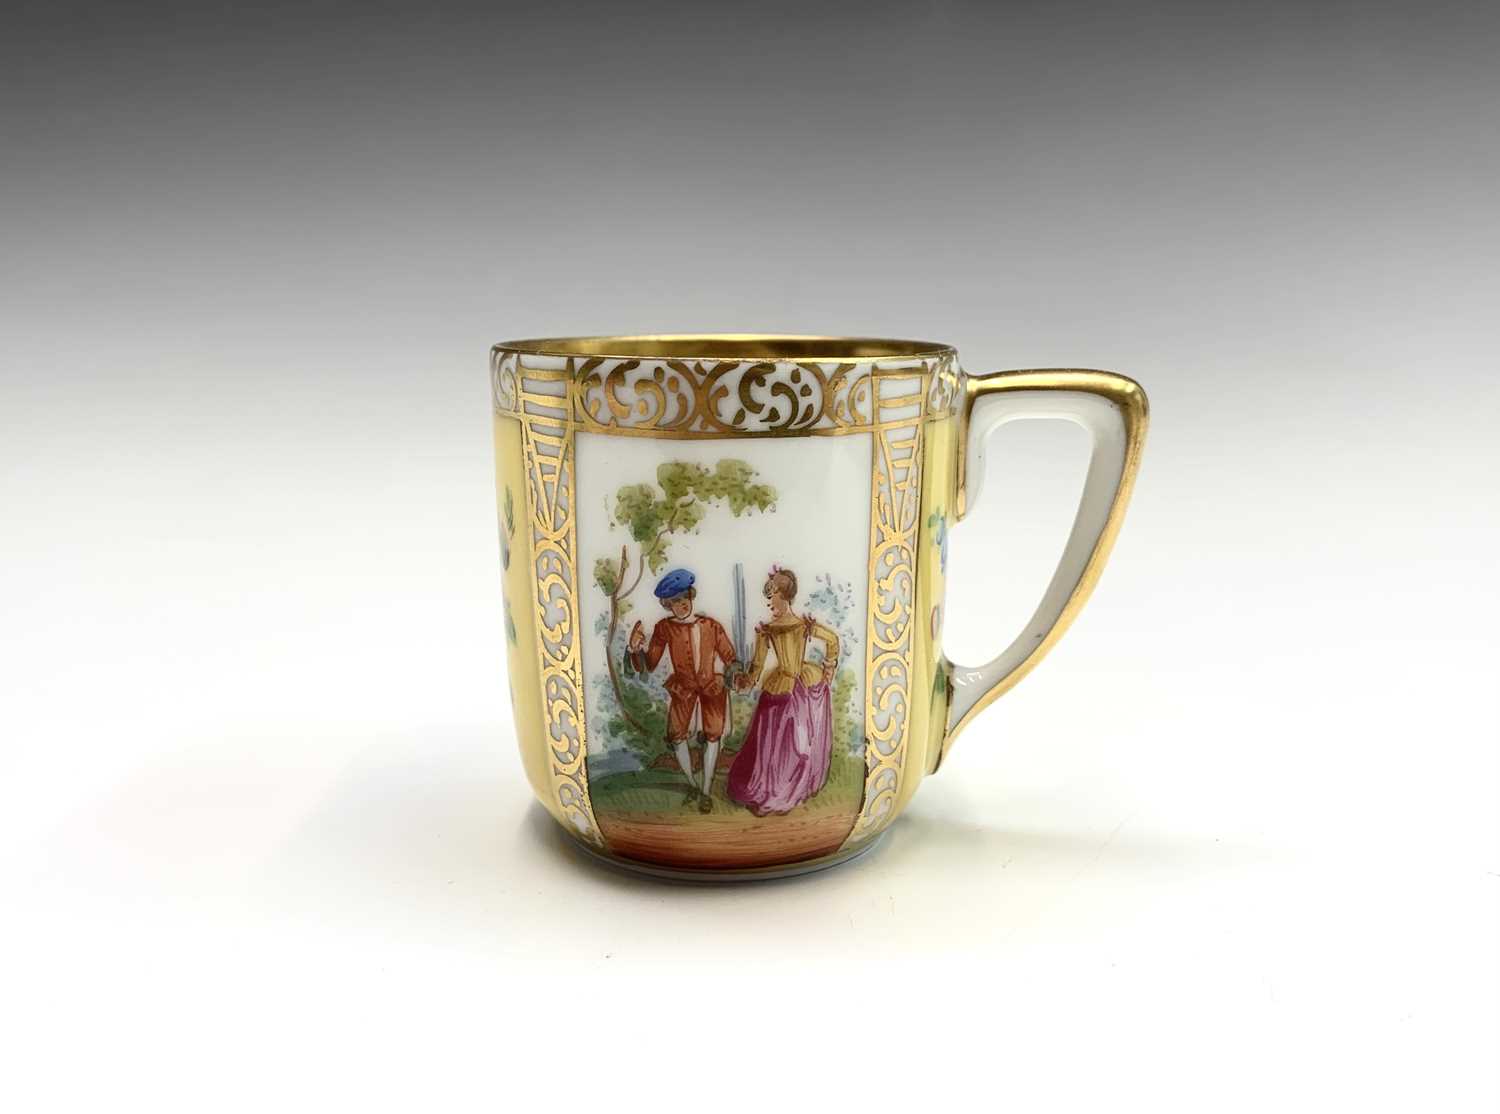 A Meissen cabinet cup and saucer, late 19th century, painted with reserves in the 18th century style - Image 2 of 9